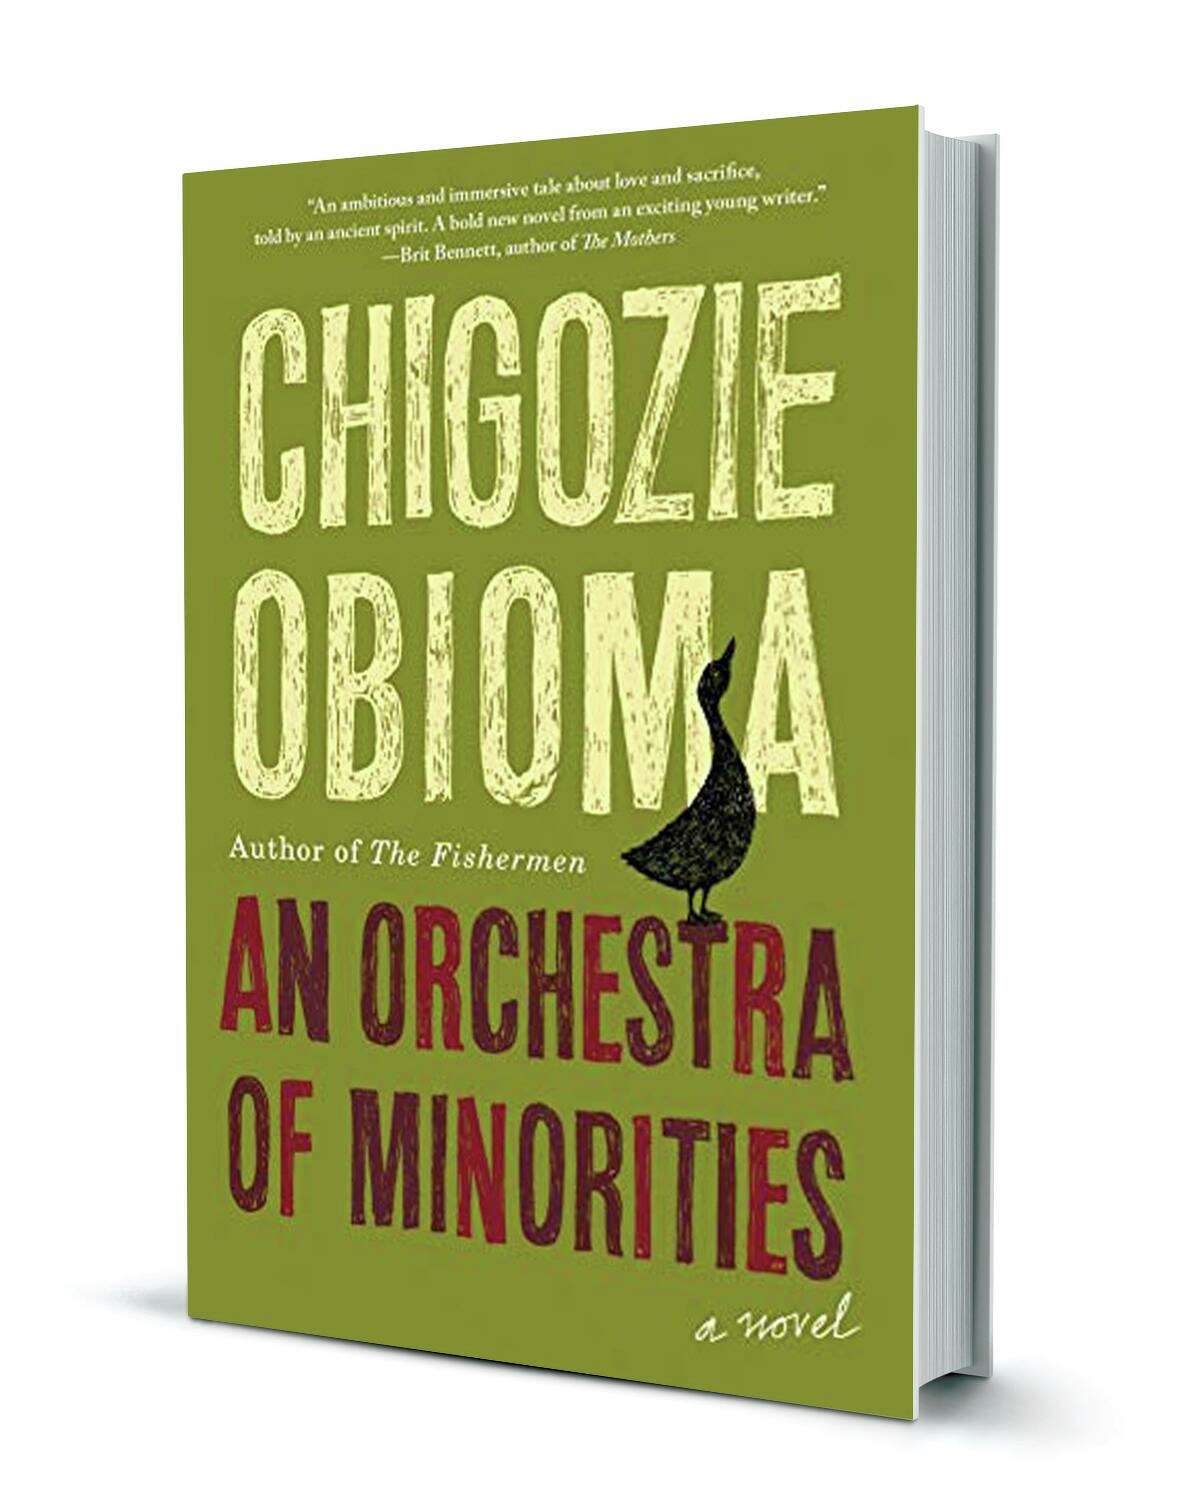 Author Chigozie Obioma published his second novel, An Orchestra of Minorities, in 2019